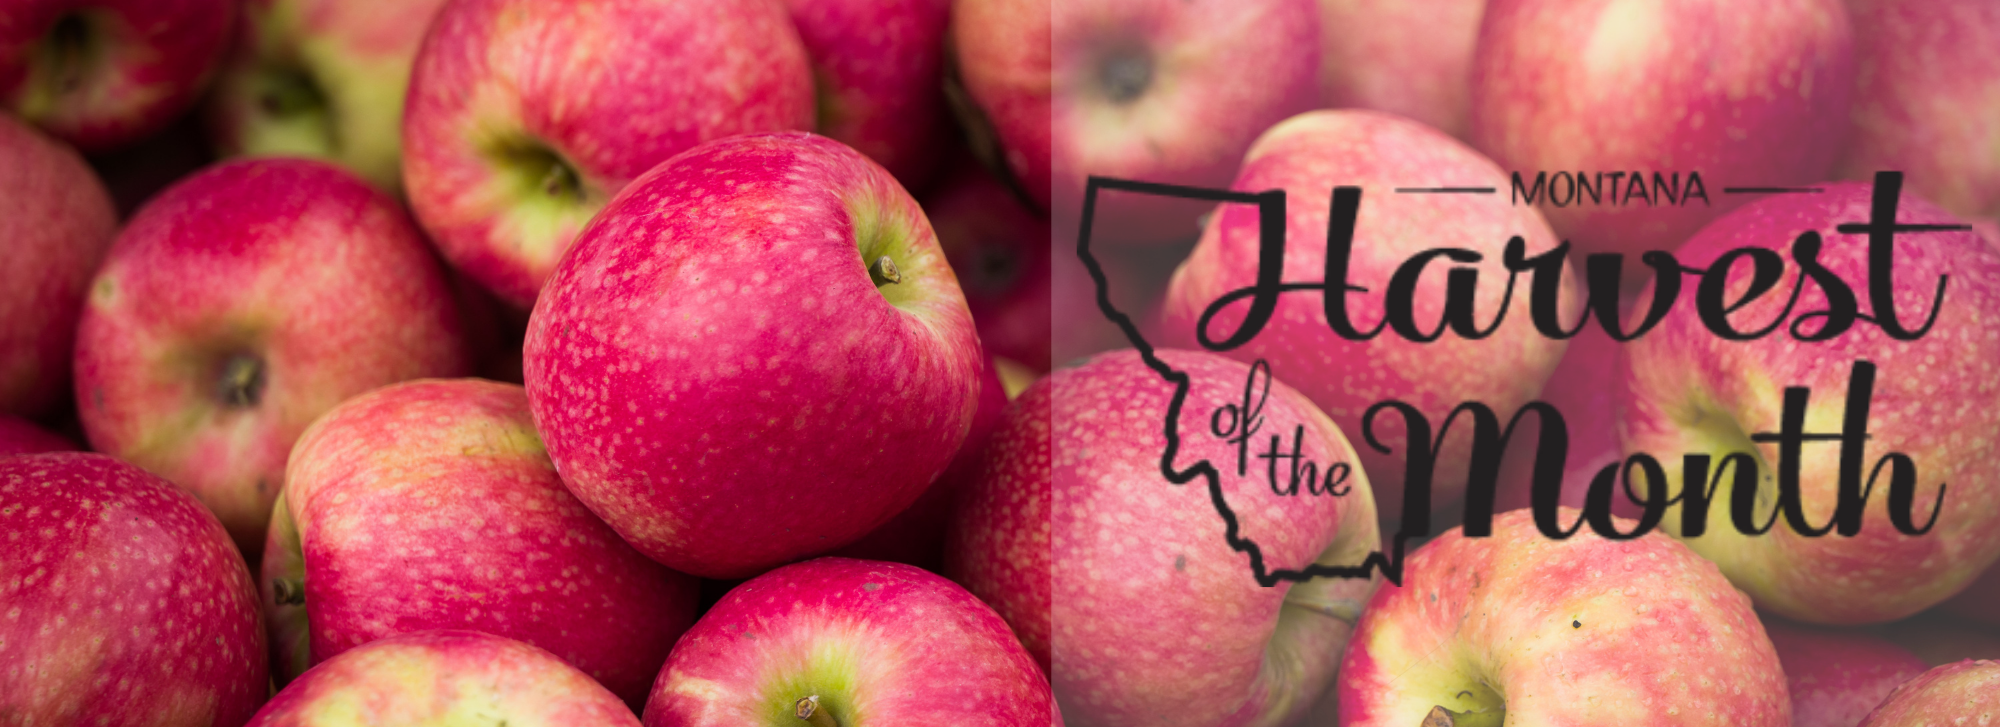 This month's Harvest of the Month is Apples.